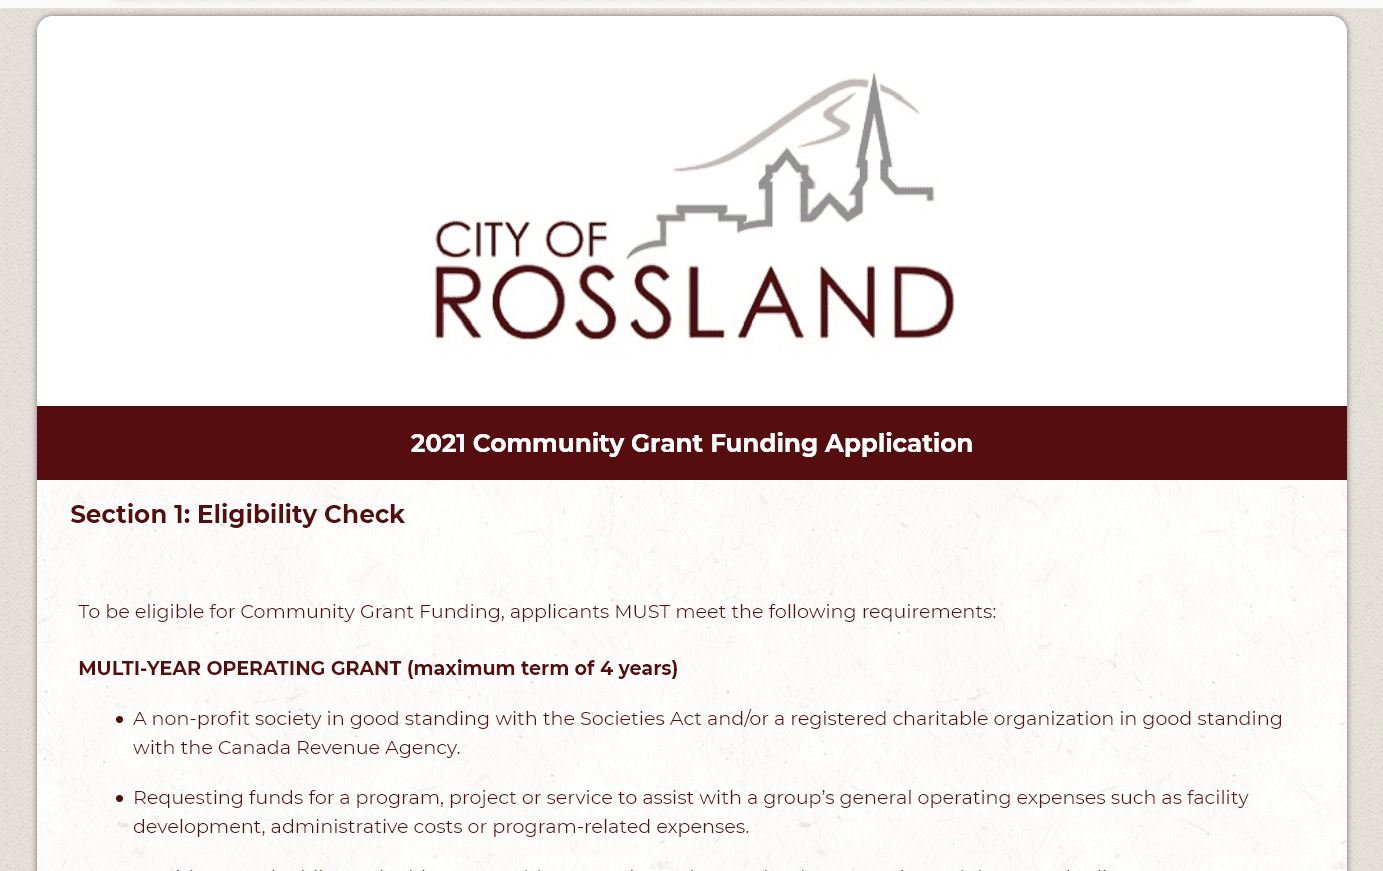 Rossland: Intake now open for Community Grant Funding